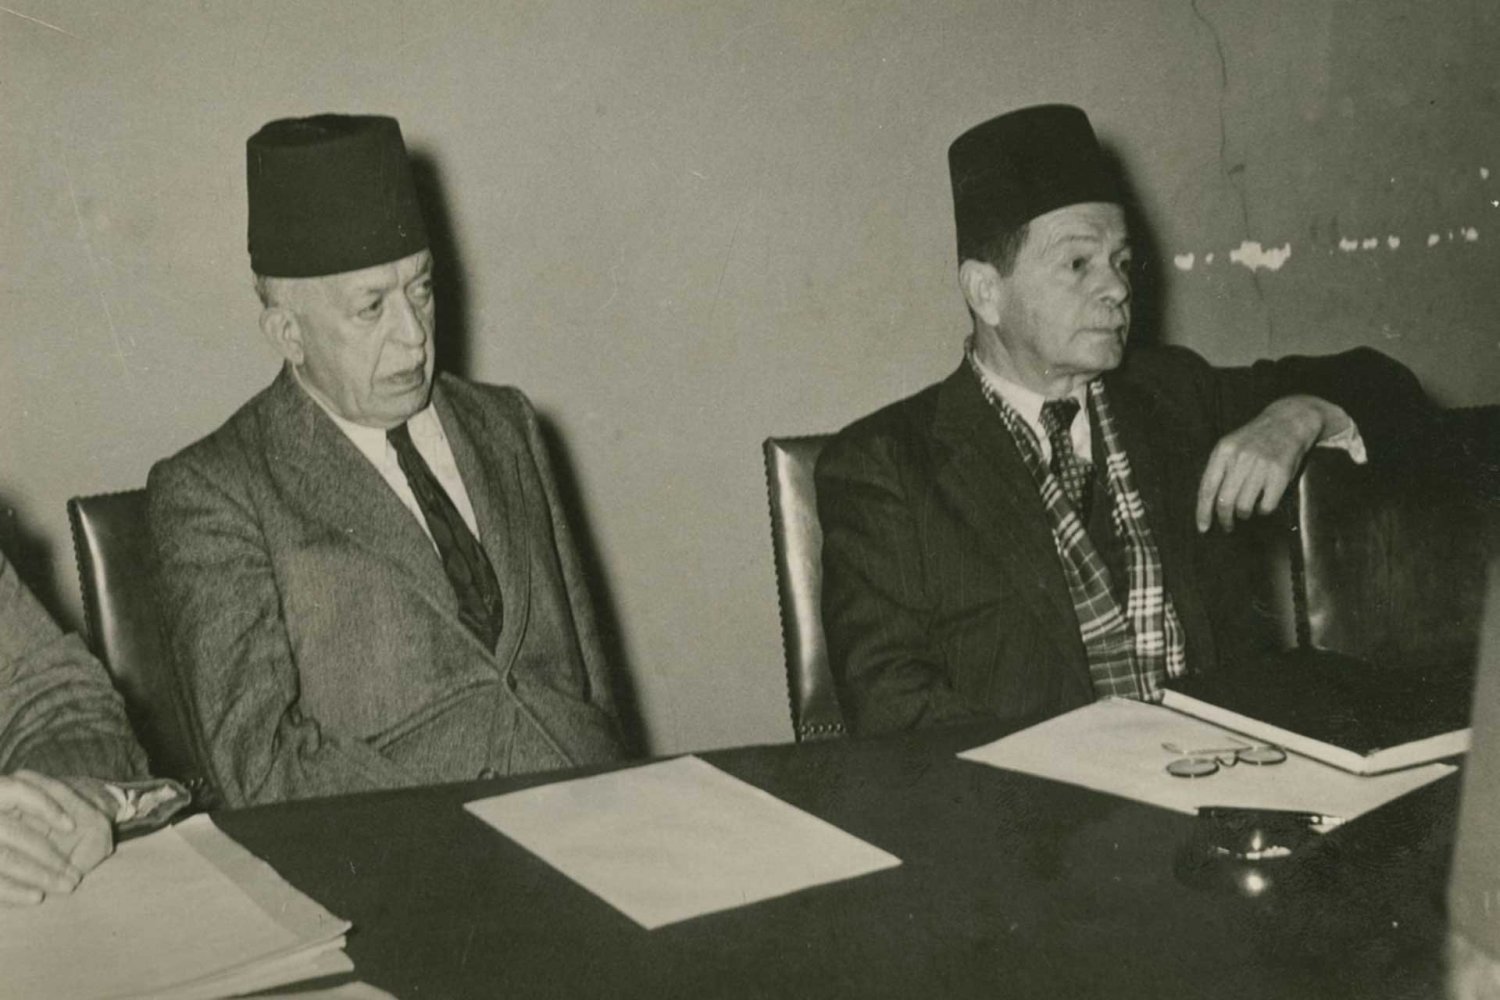 Khalil Sakakini and Adel Jabre (right), members of the Academy of the Arabic Language, Cairo, ca. 1950.